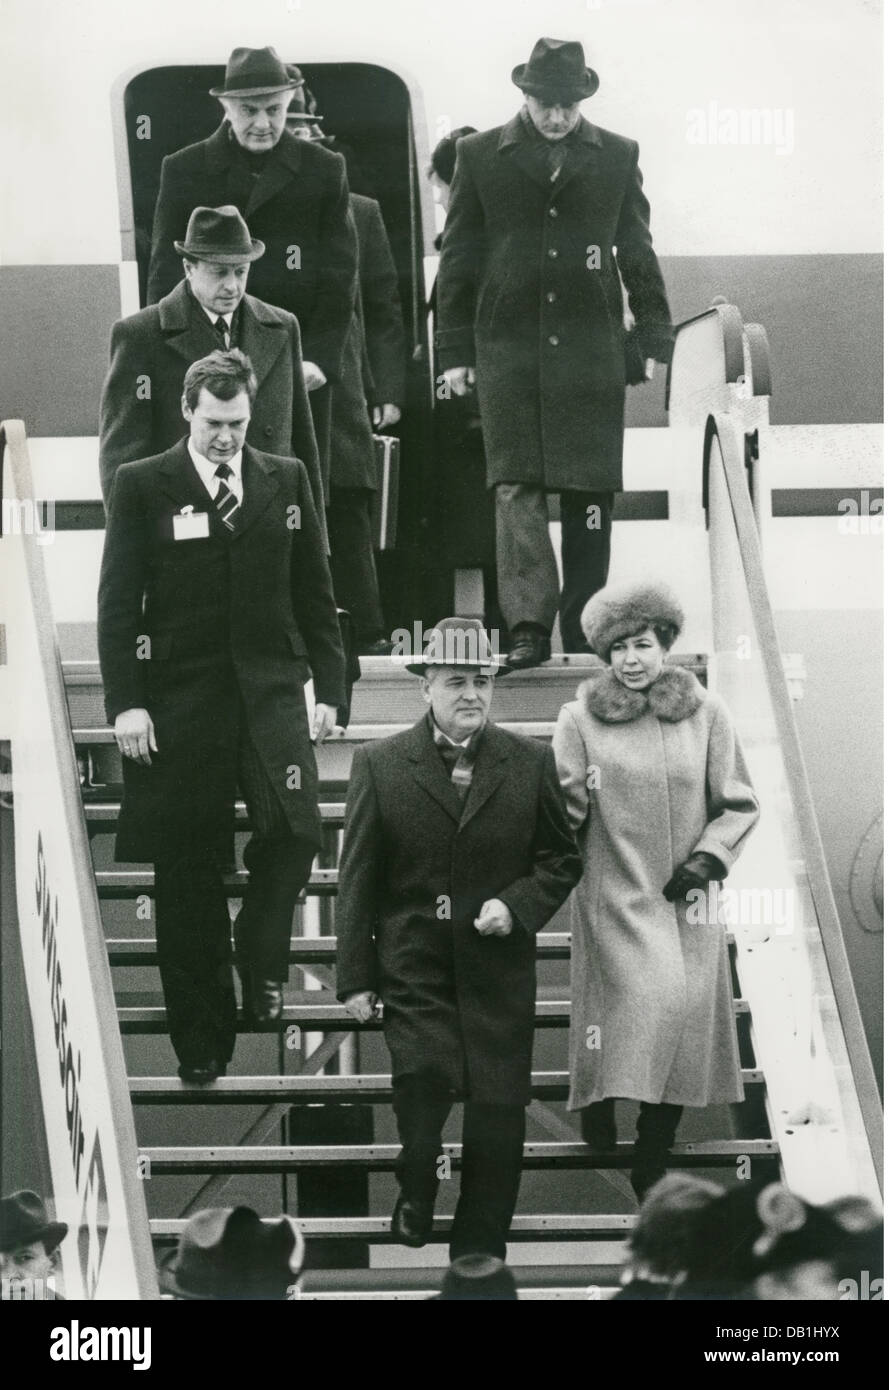 Gorbatschow, Michail Sergejewitsch, * 2.3.1931, Soviet politician, full length, with his wife Raissa, arrival on the Genevese airport for the first meeting Reagan-Gorbatschow, with Soviet delegation, going down the gangway, Geneva, Switzerland, 19.11.1985, Stock Photo